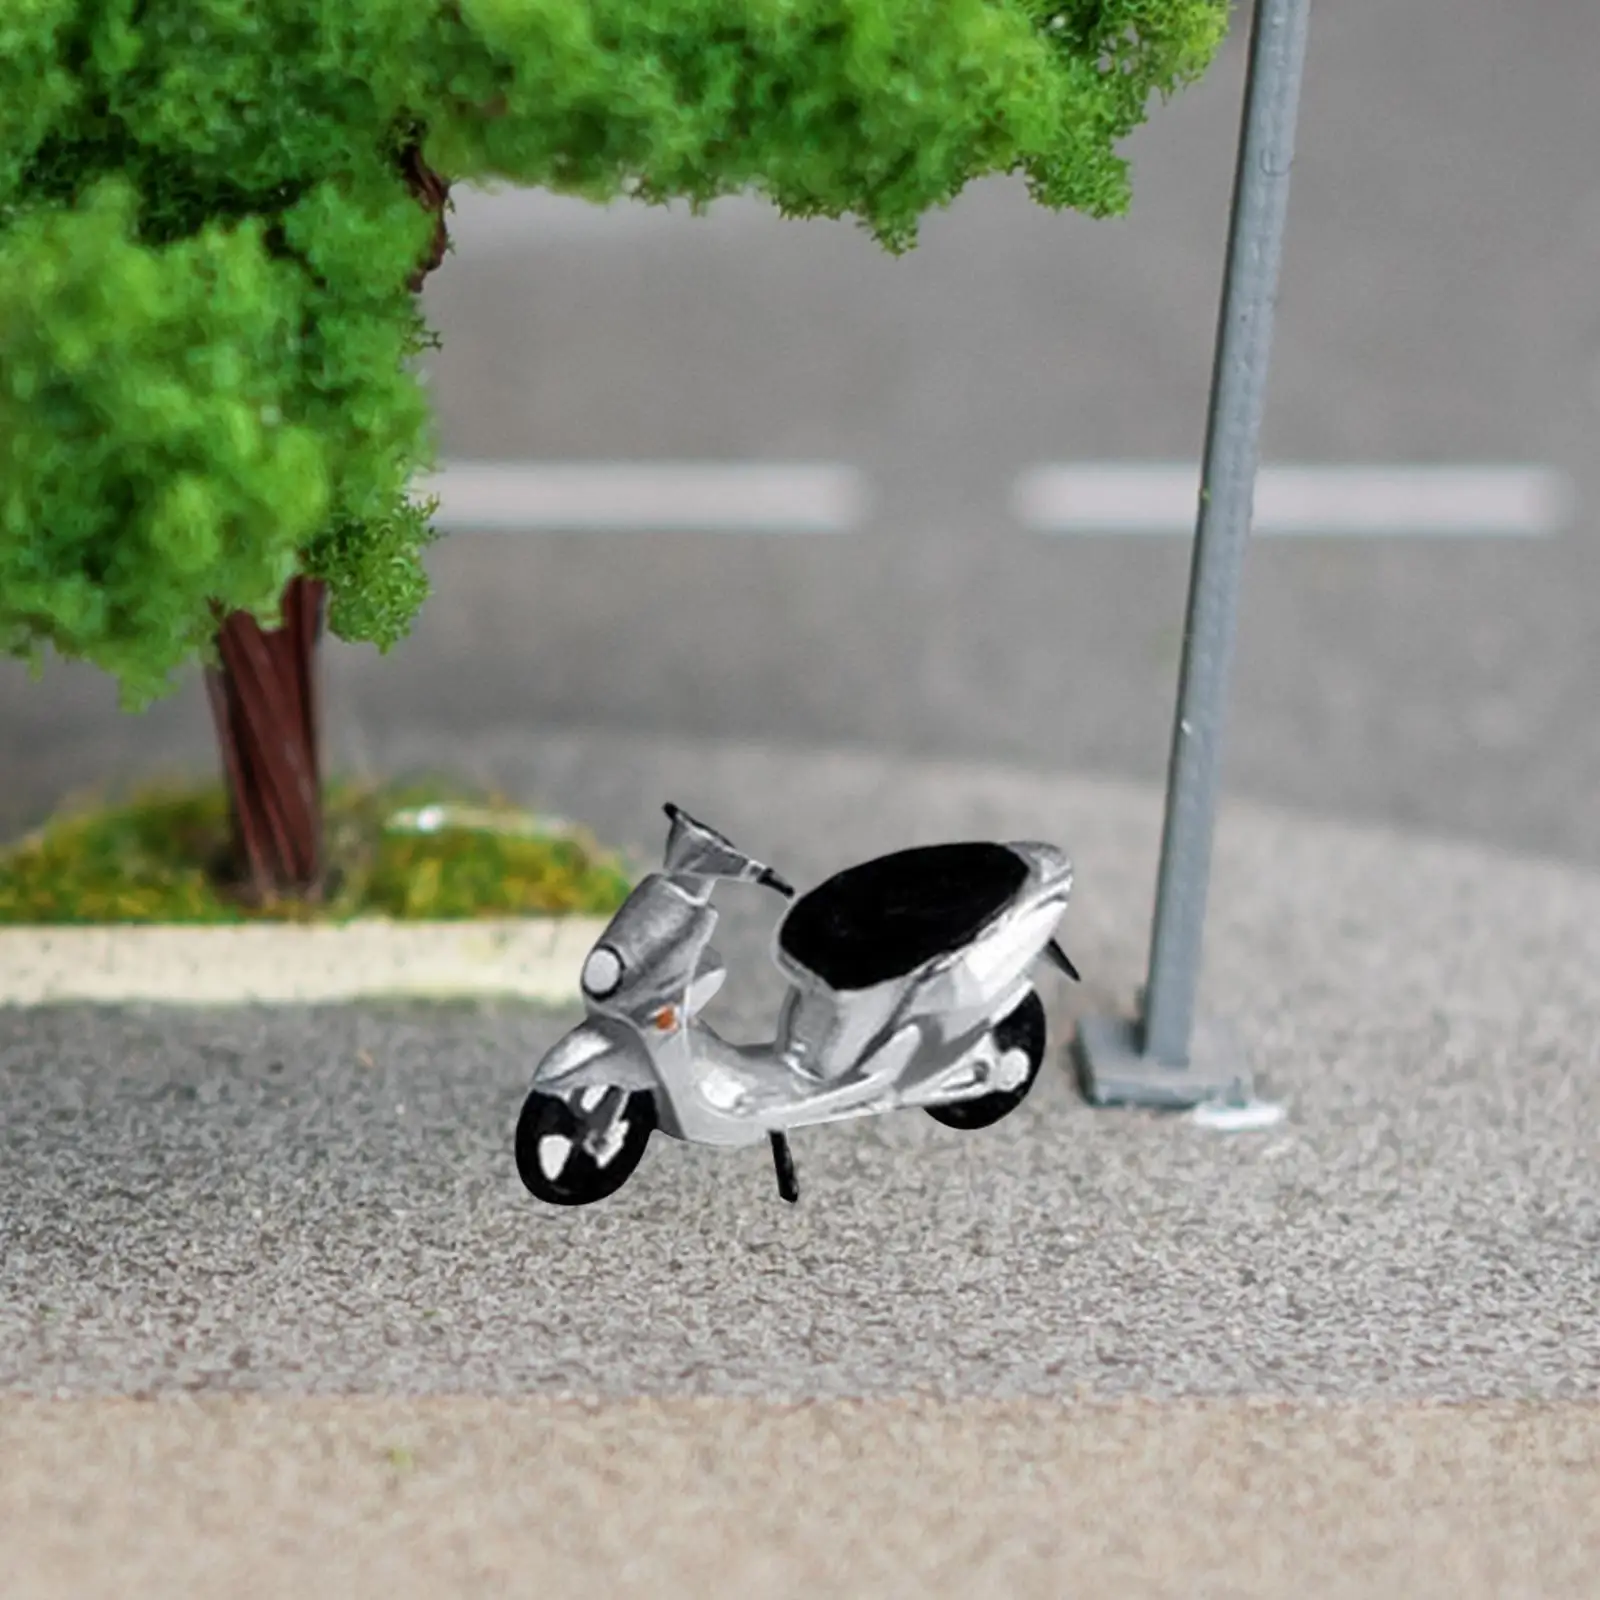 1/64 Motorcycle Model Figure Hand Painted Collection Miniature Doll Model for Scenery Landscape Dollhouse Decoration Layout